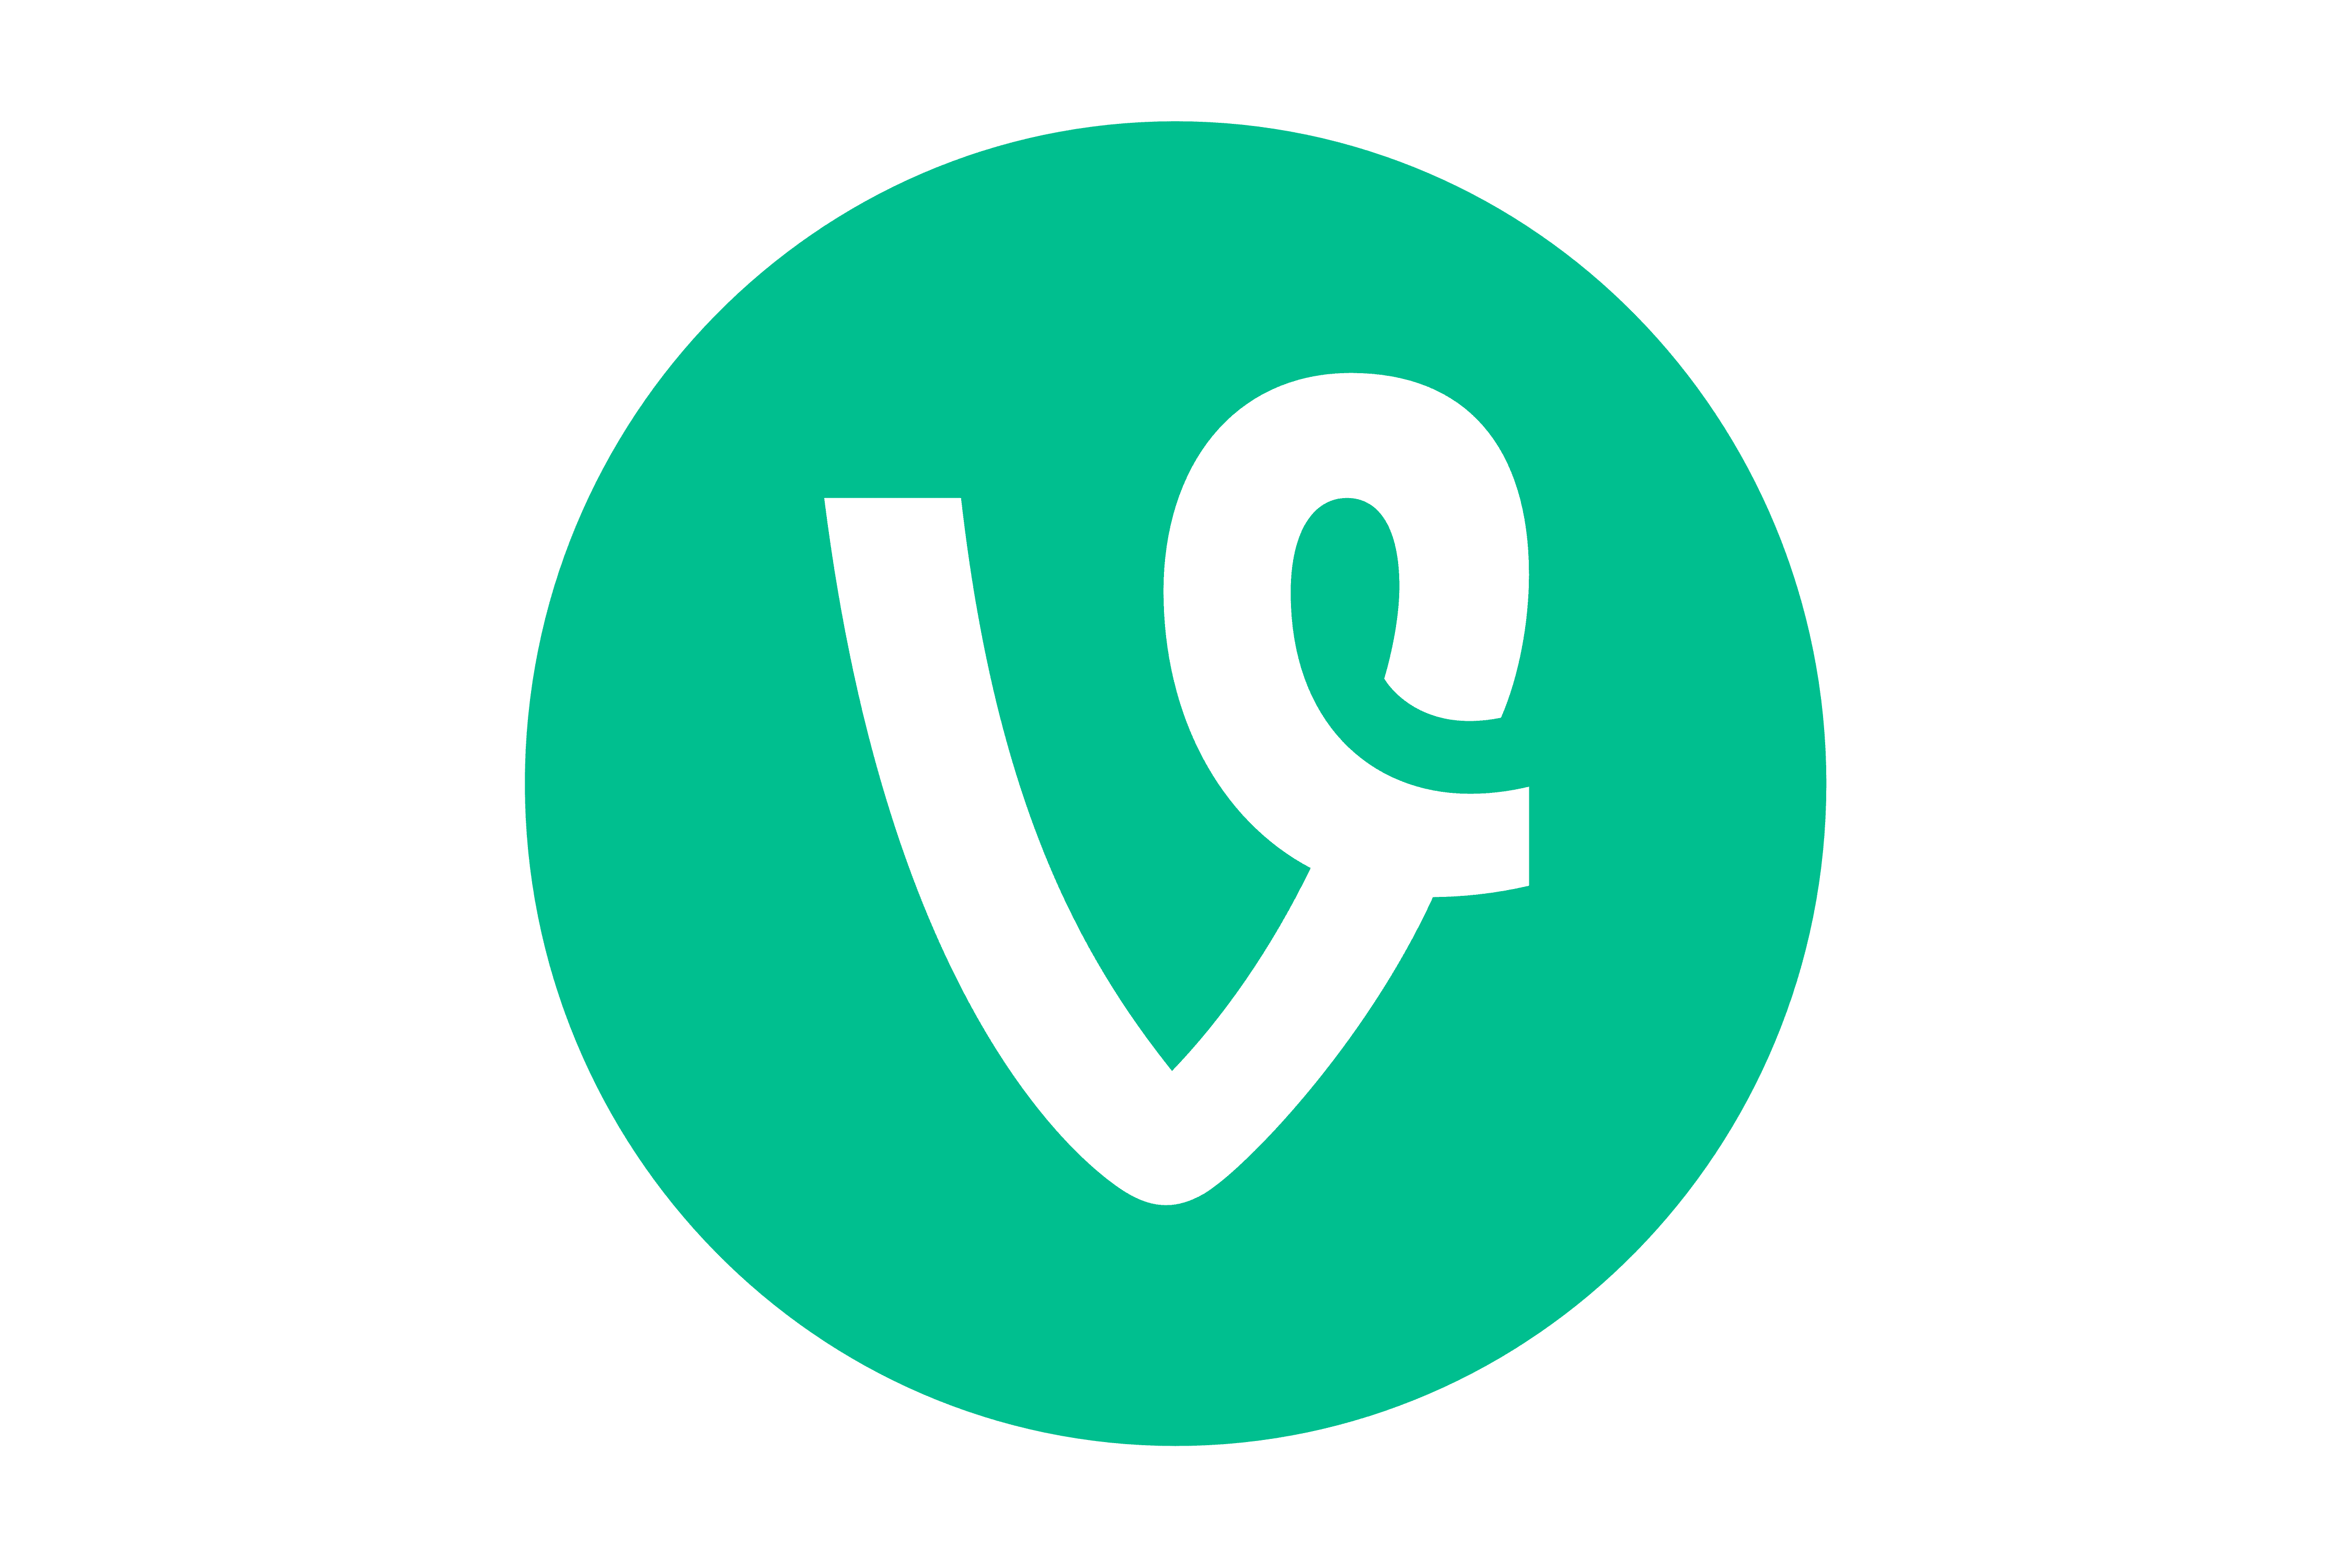 vine-logo-and-symbol-meaning-history-png-brand-daftsex-hd